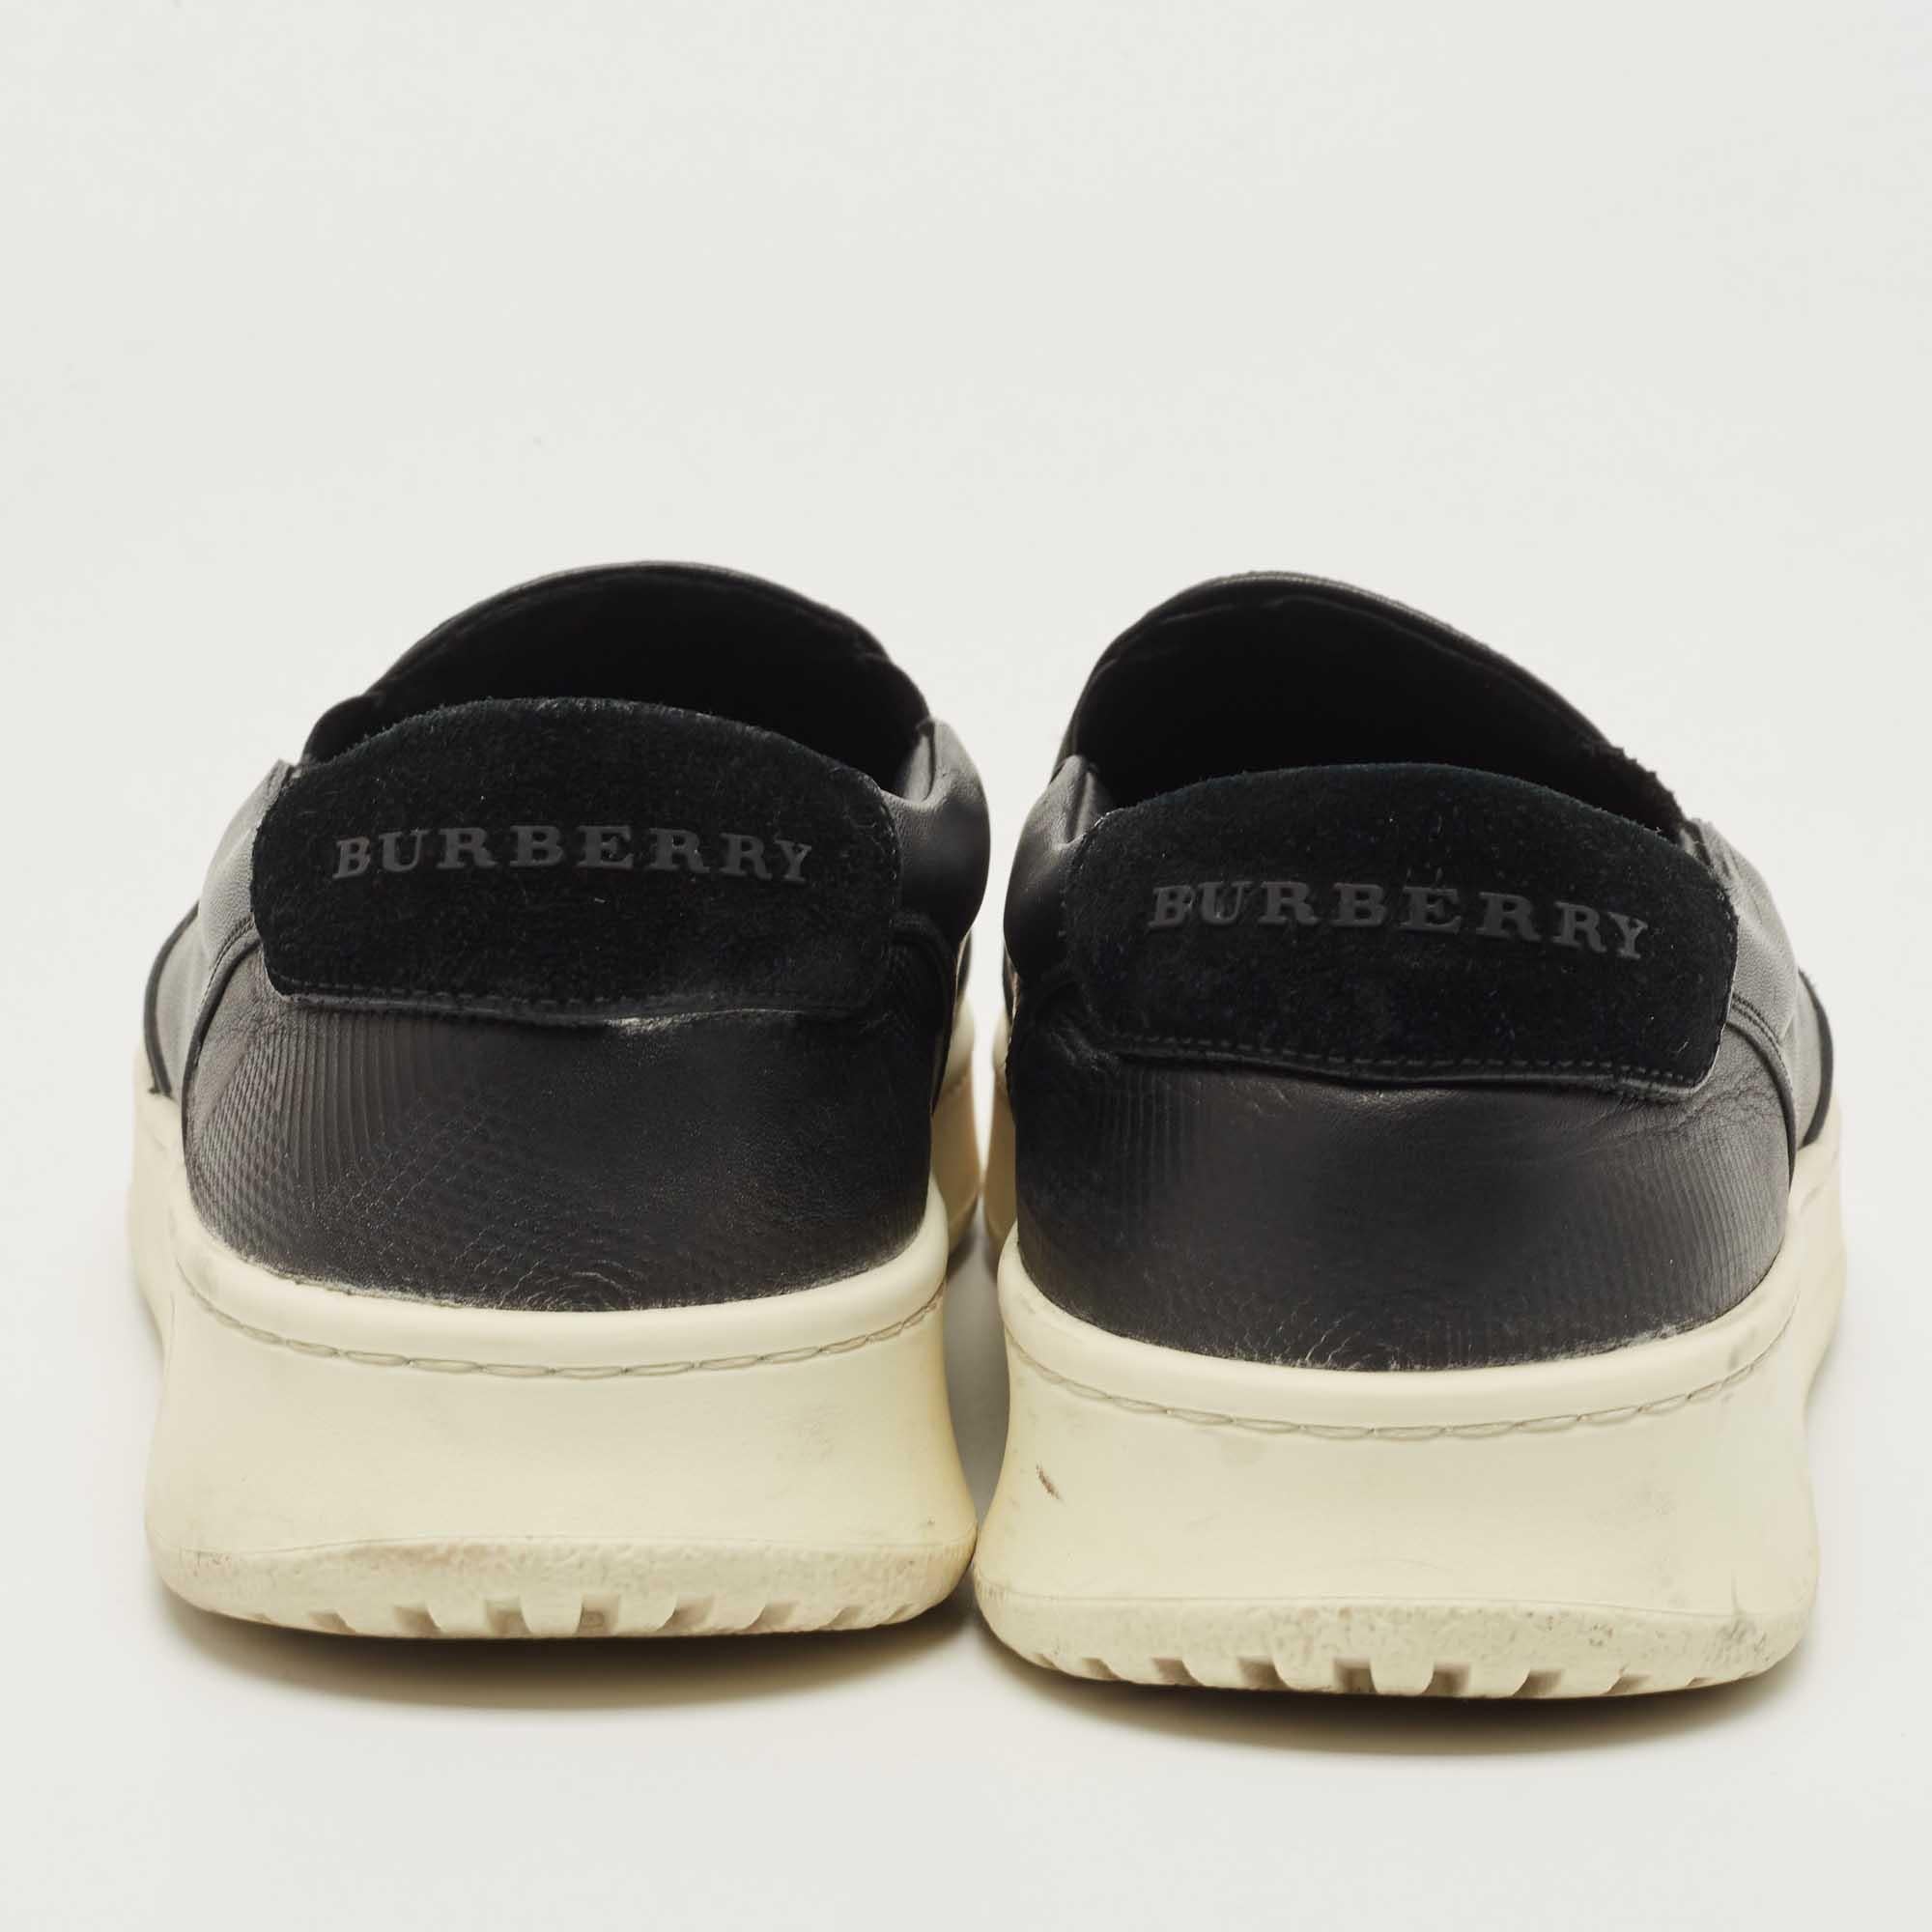 Burberry Black Leather Slip On Sneakers Size 43 For Sale 3